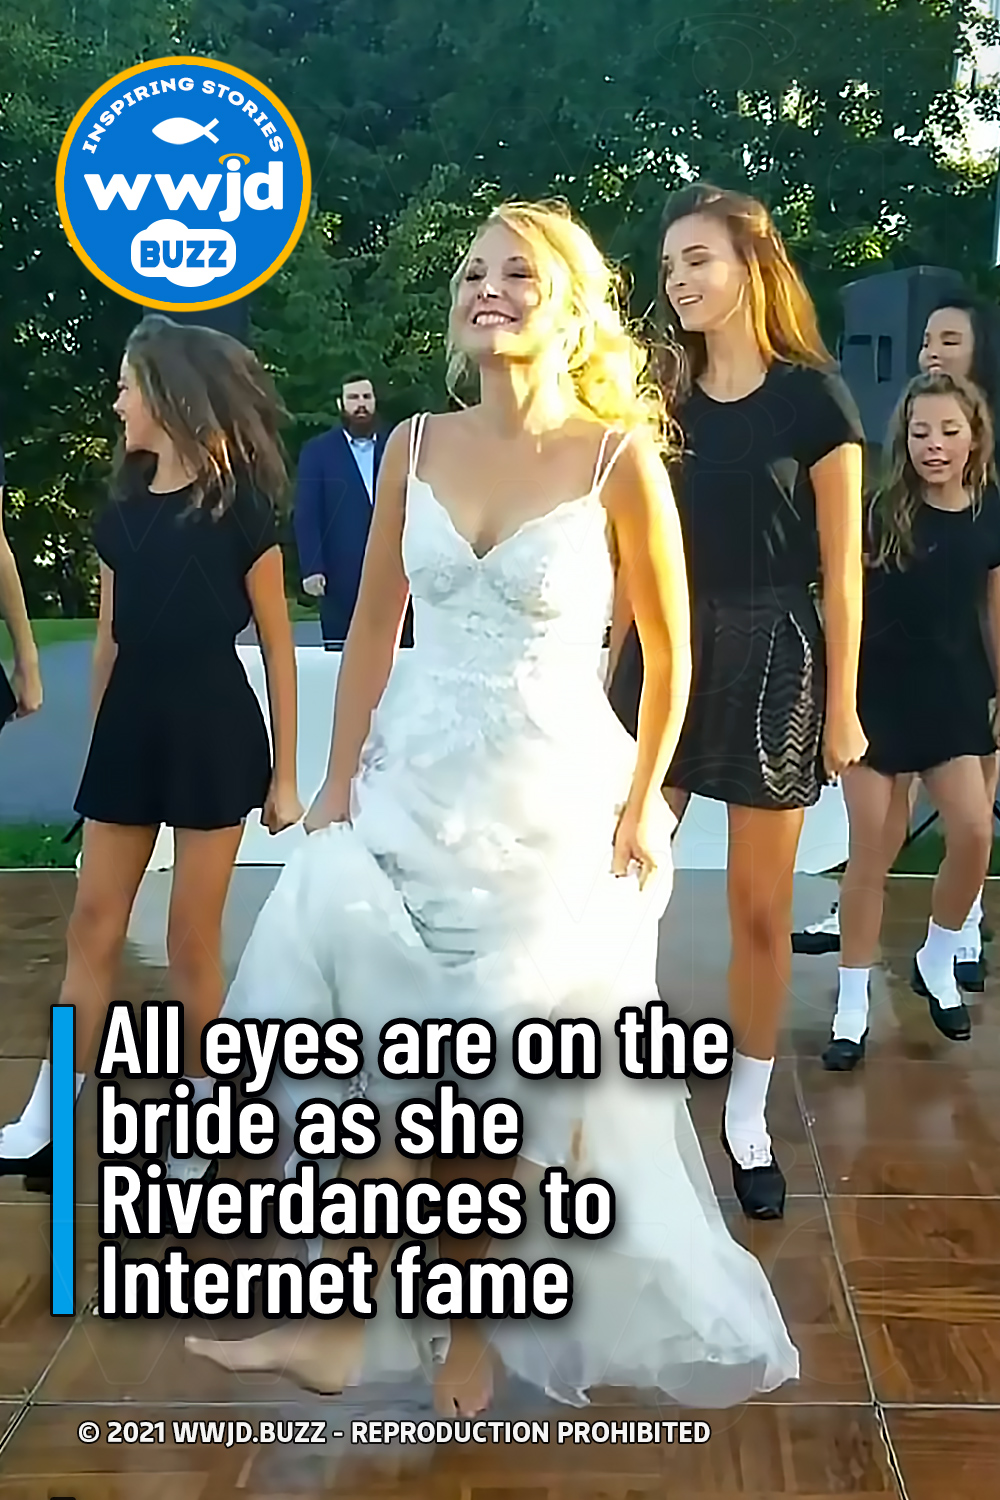 All eyes are on the bride as she Riverdances to Internet fame